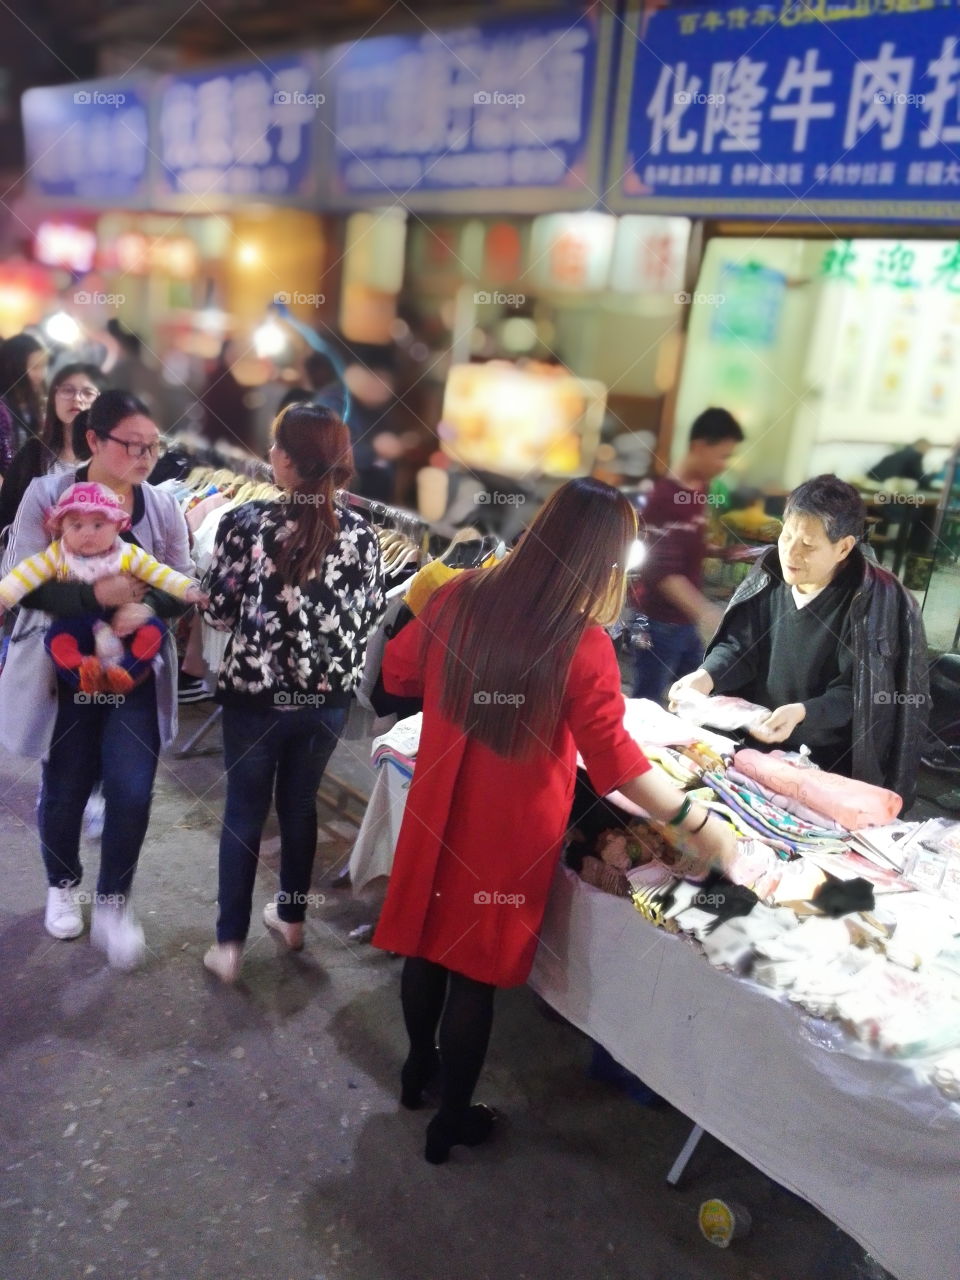 this photo was captured at night almost 9pm in xi'an city in China. It must be different from your city. It shows night life which some of people selling little things on the street to suppoer their life. most of people of living nearby this village enjoy shopping in there. it is cheaper to buy somethings you need than other stores or shopping mall. so i perfer to go shopping in there instead of mall or shopping center. when you are hungry, you also get foods there and enjoy it...
usually it starts from 8pm to 11pm. the girl with red cloth was looking for some socks she needs. maybe they were bargaining . haha....